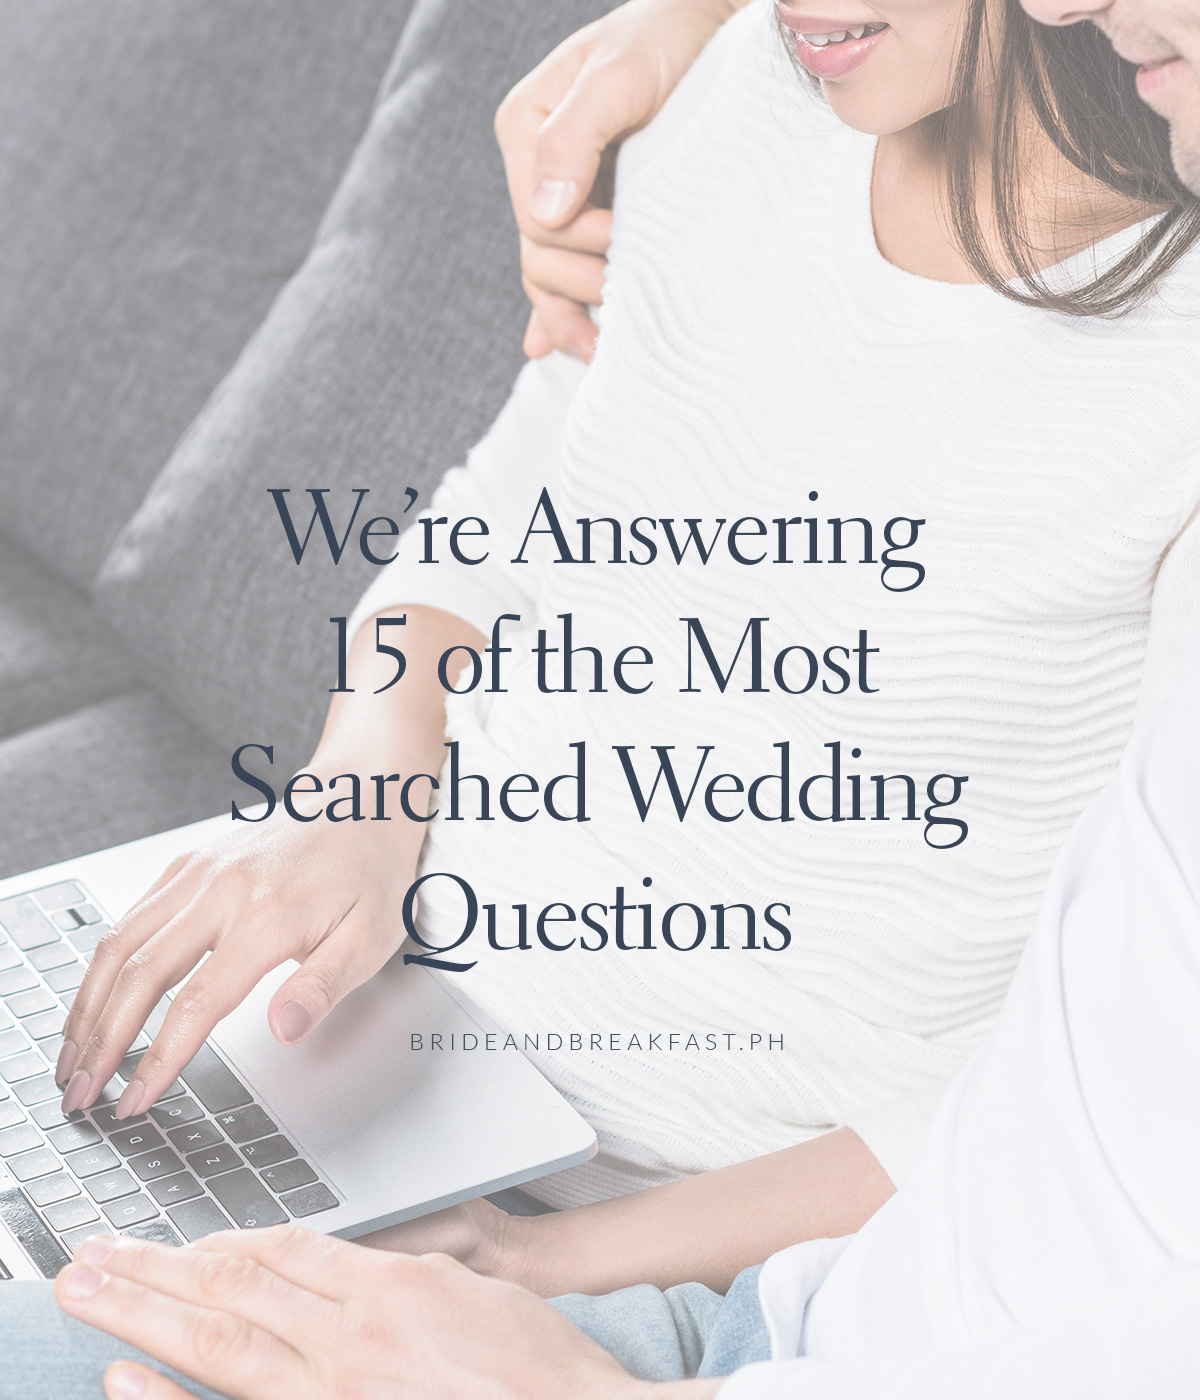 We’re Answering 15 of the Most Searched Wedding Questions